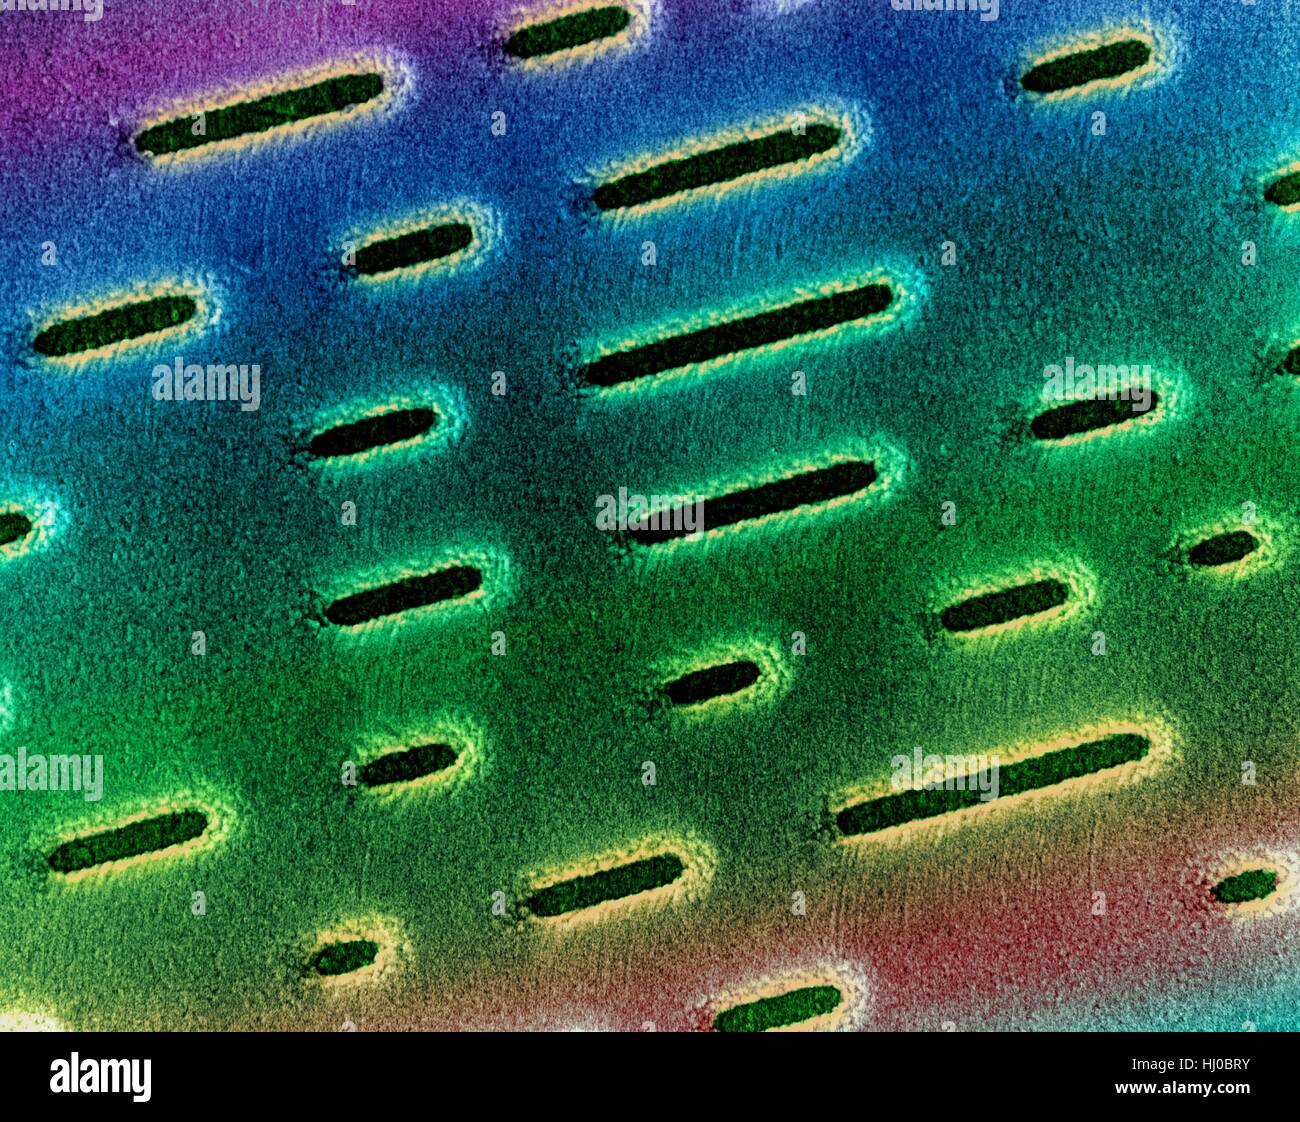 Coloured scanning electron micrograph (SEM) of Compact disc surface (CD, CD-ROM). A CD is a plastic disc that is etched or pressed with a series of fine depressions representing the digitized audio or musical signal. A very thin layer of metal is used to coat this surface (including the depressions) so that the laser light can be reflected. Another thin layer of plastic overlies the metal surface for protection. Magnification: x2, 250 when shortest axis printed at 25 millimetres. Stock Photo